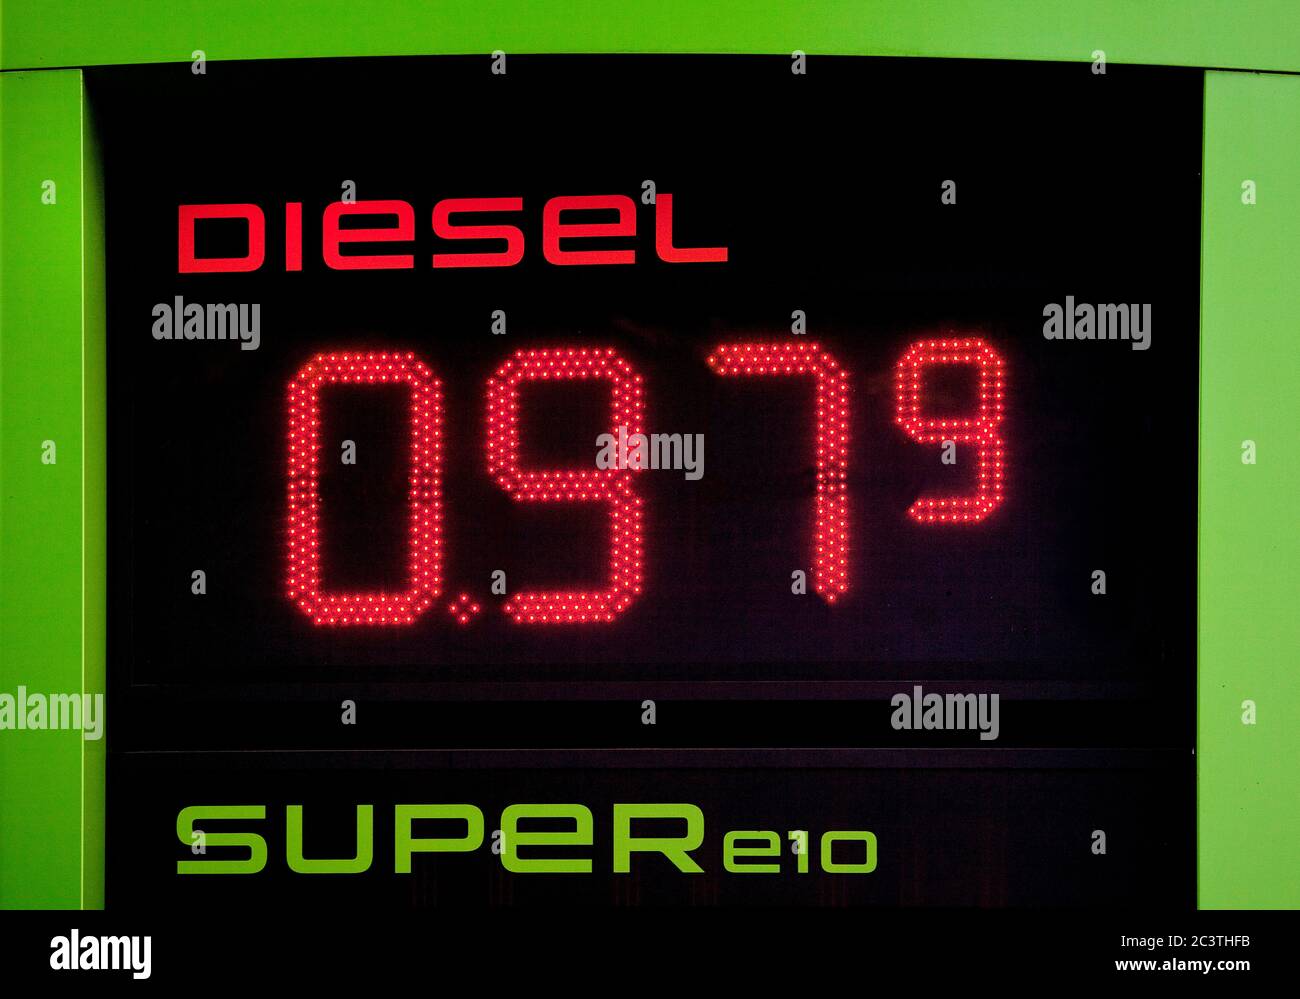 low price of diesel during corona crisis in April 2020, Germany Stock Photo